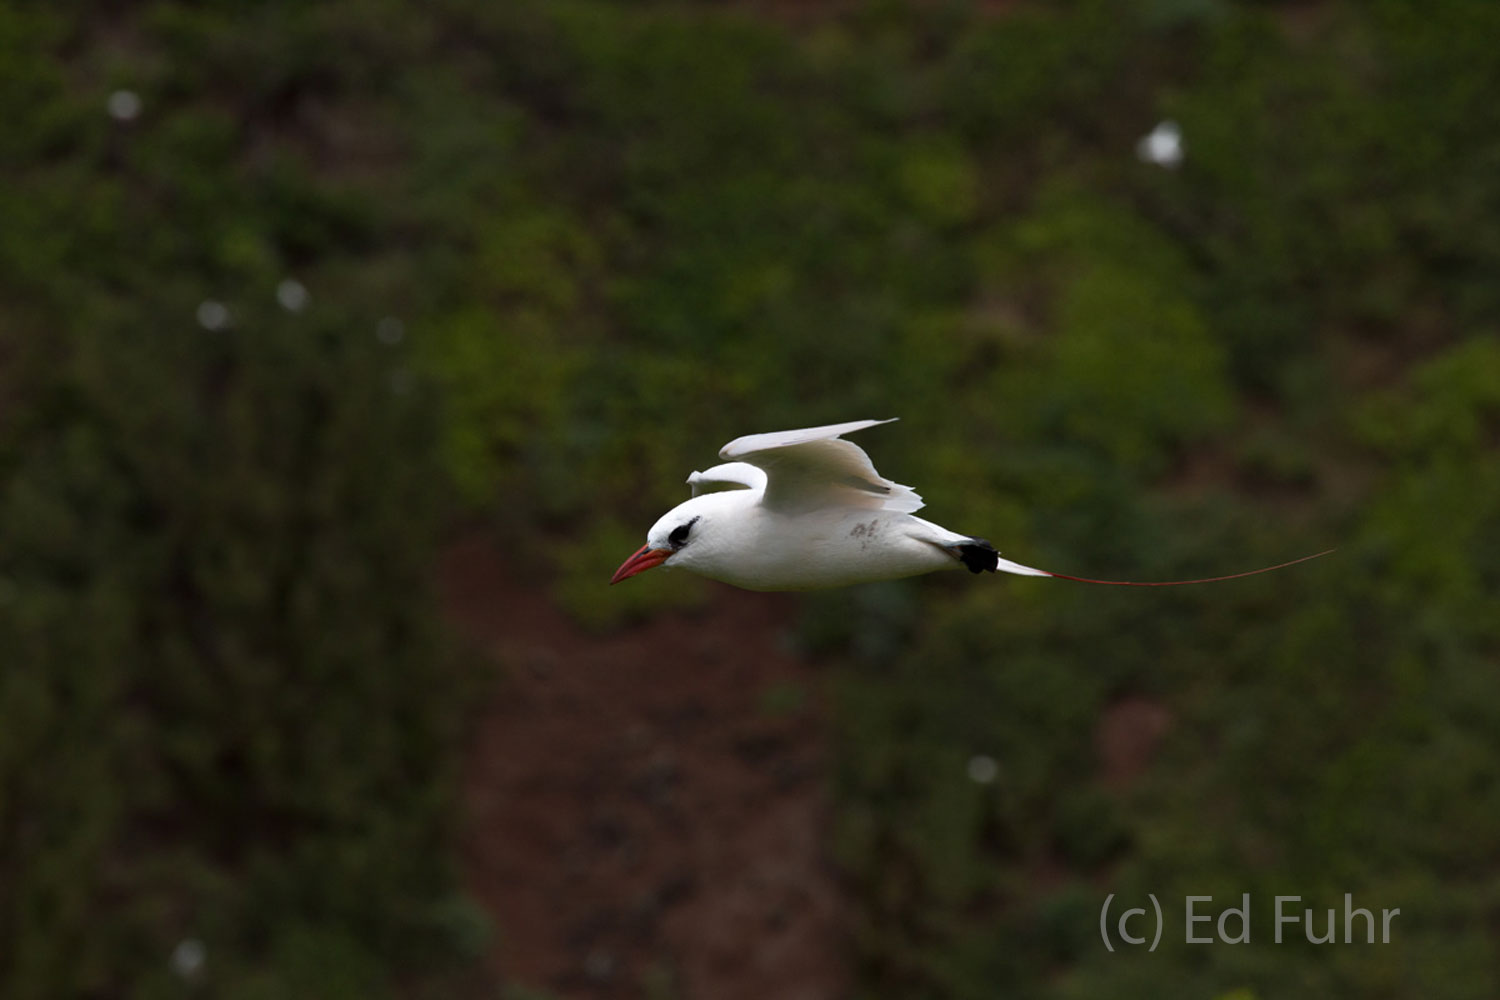 Native to the Indian and Pacific Oceans, this bird puts on amazing aerial courtship displays.